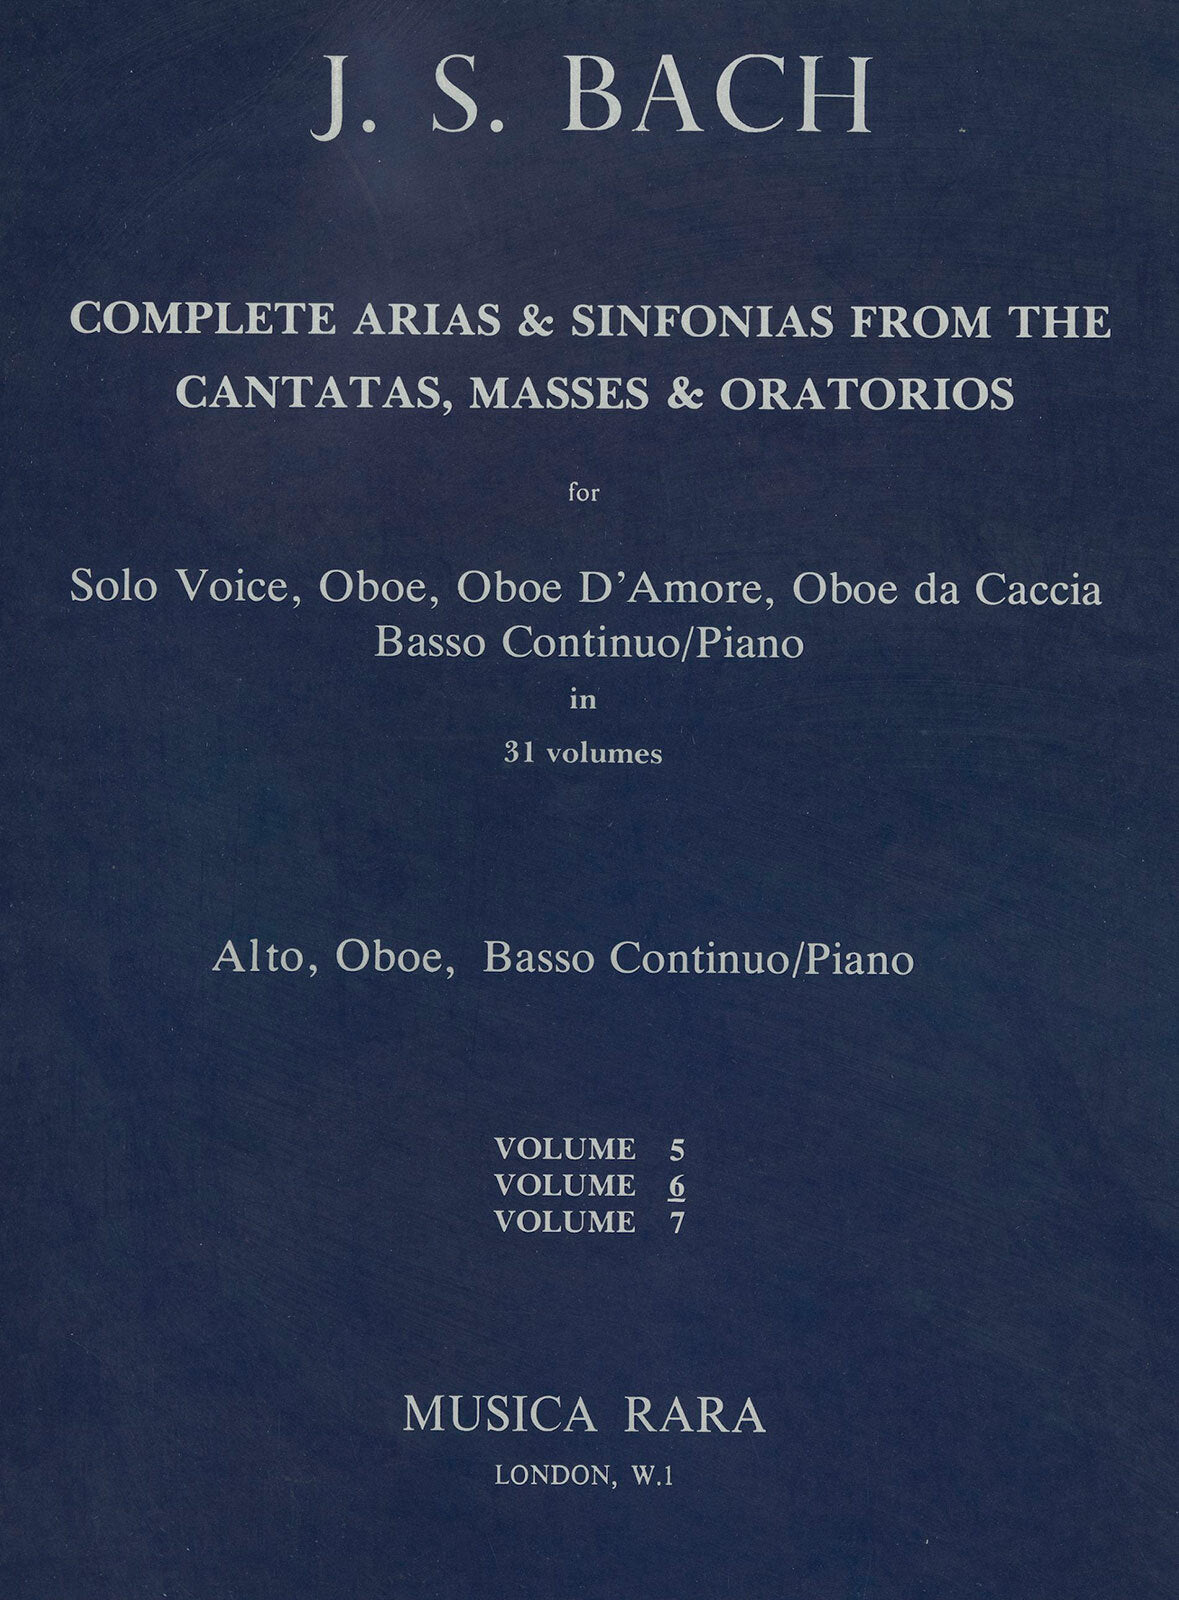 Bach: Complete Arias and Sinfonias - Volume 6 (BWV 79, 102, 114, 159)